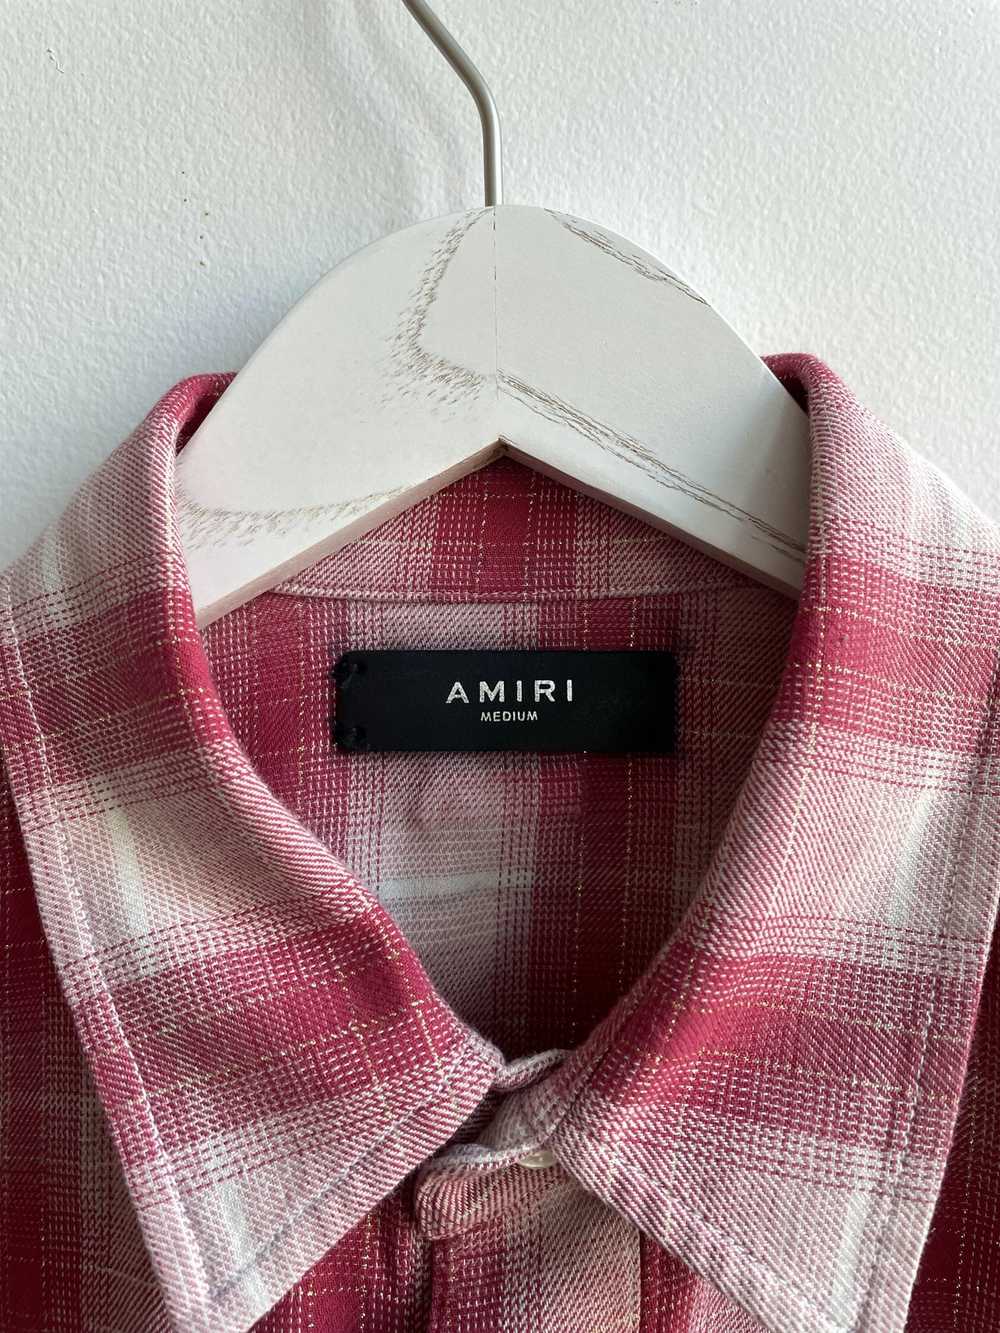 Amiri Distressed Bleached Flannel - image 3